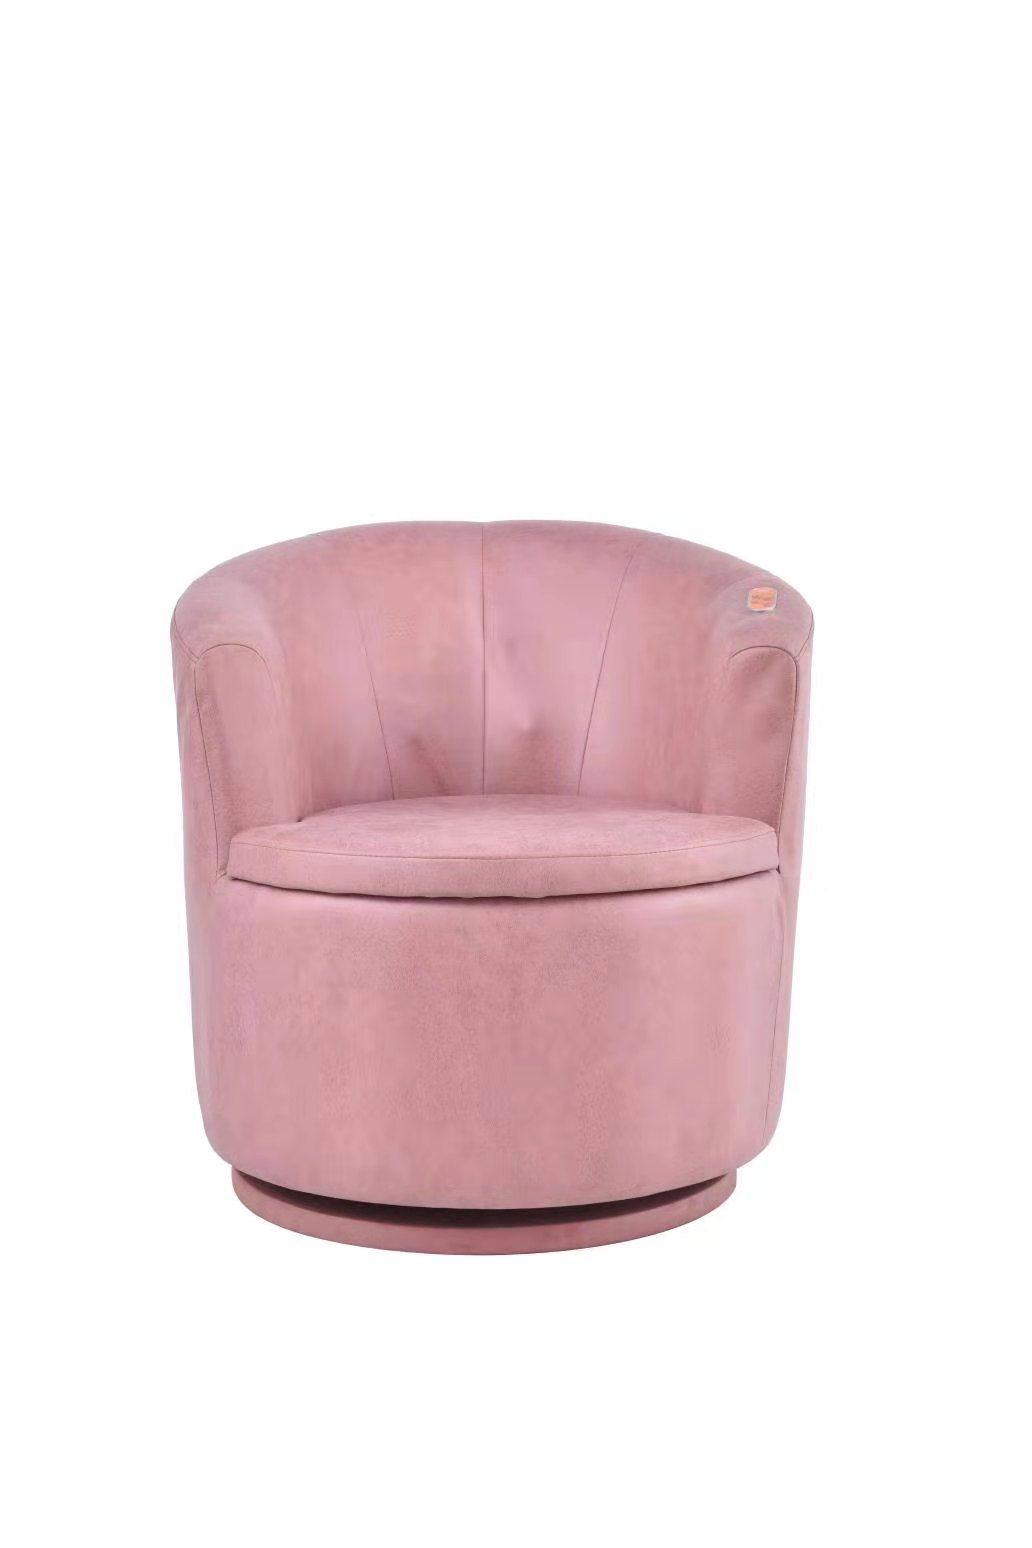 L8 CUTE PINK MASSAGE SOFA WITH PU LEATHER